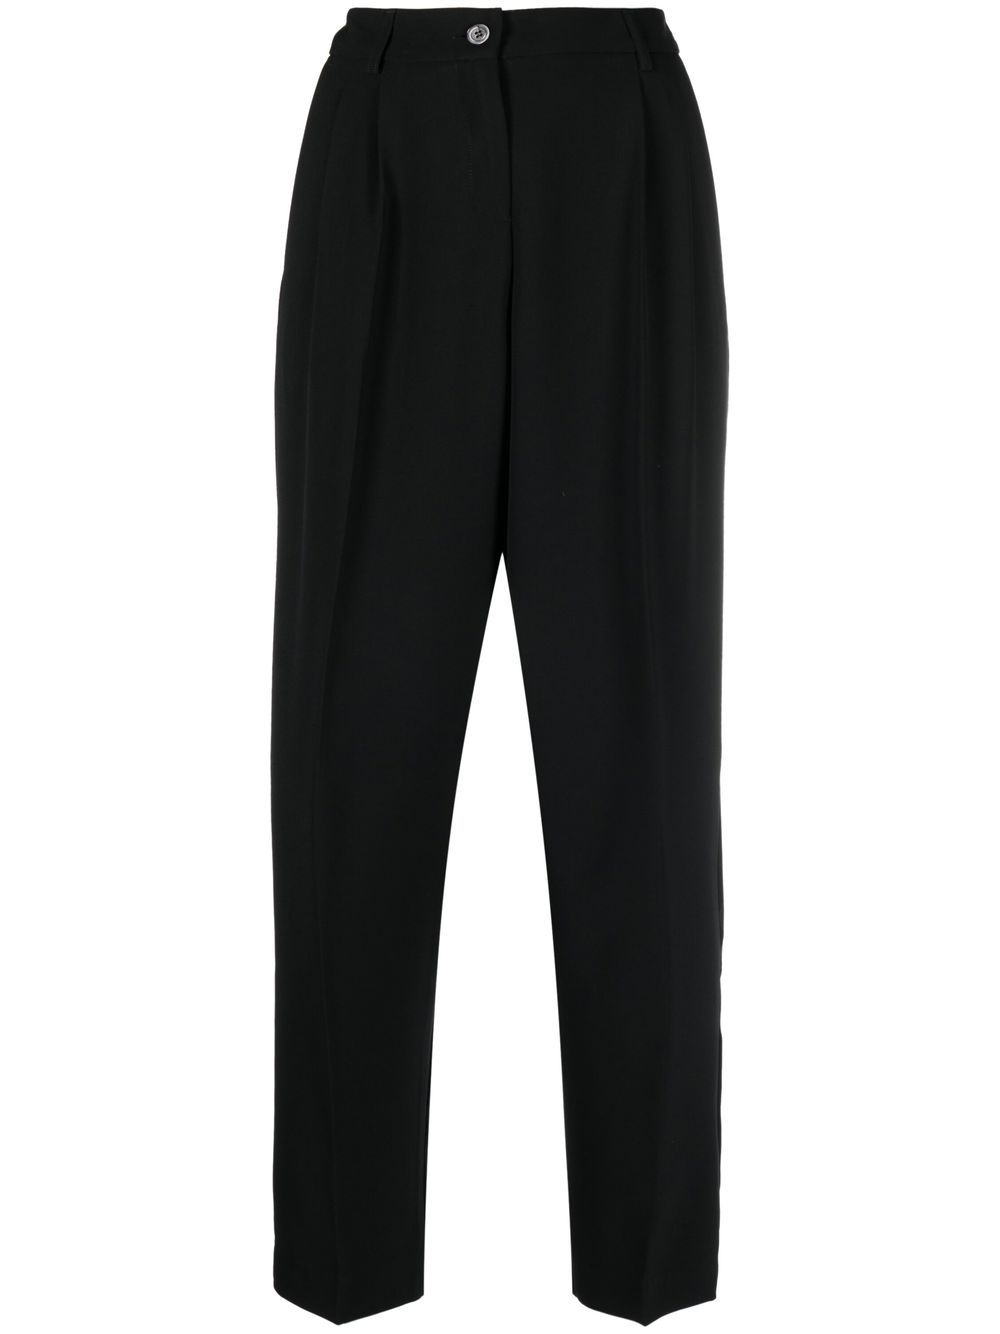 Cenere GB tapered high-waist trousers - Black